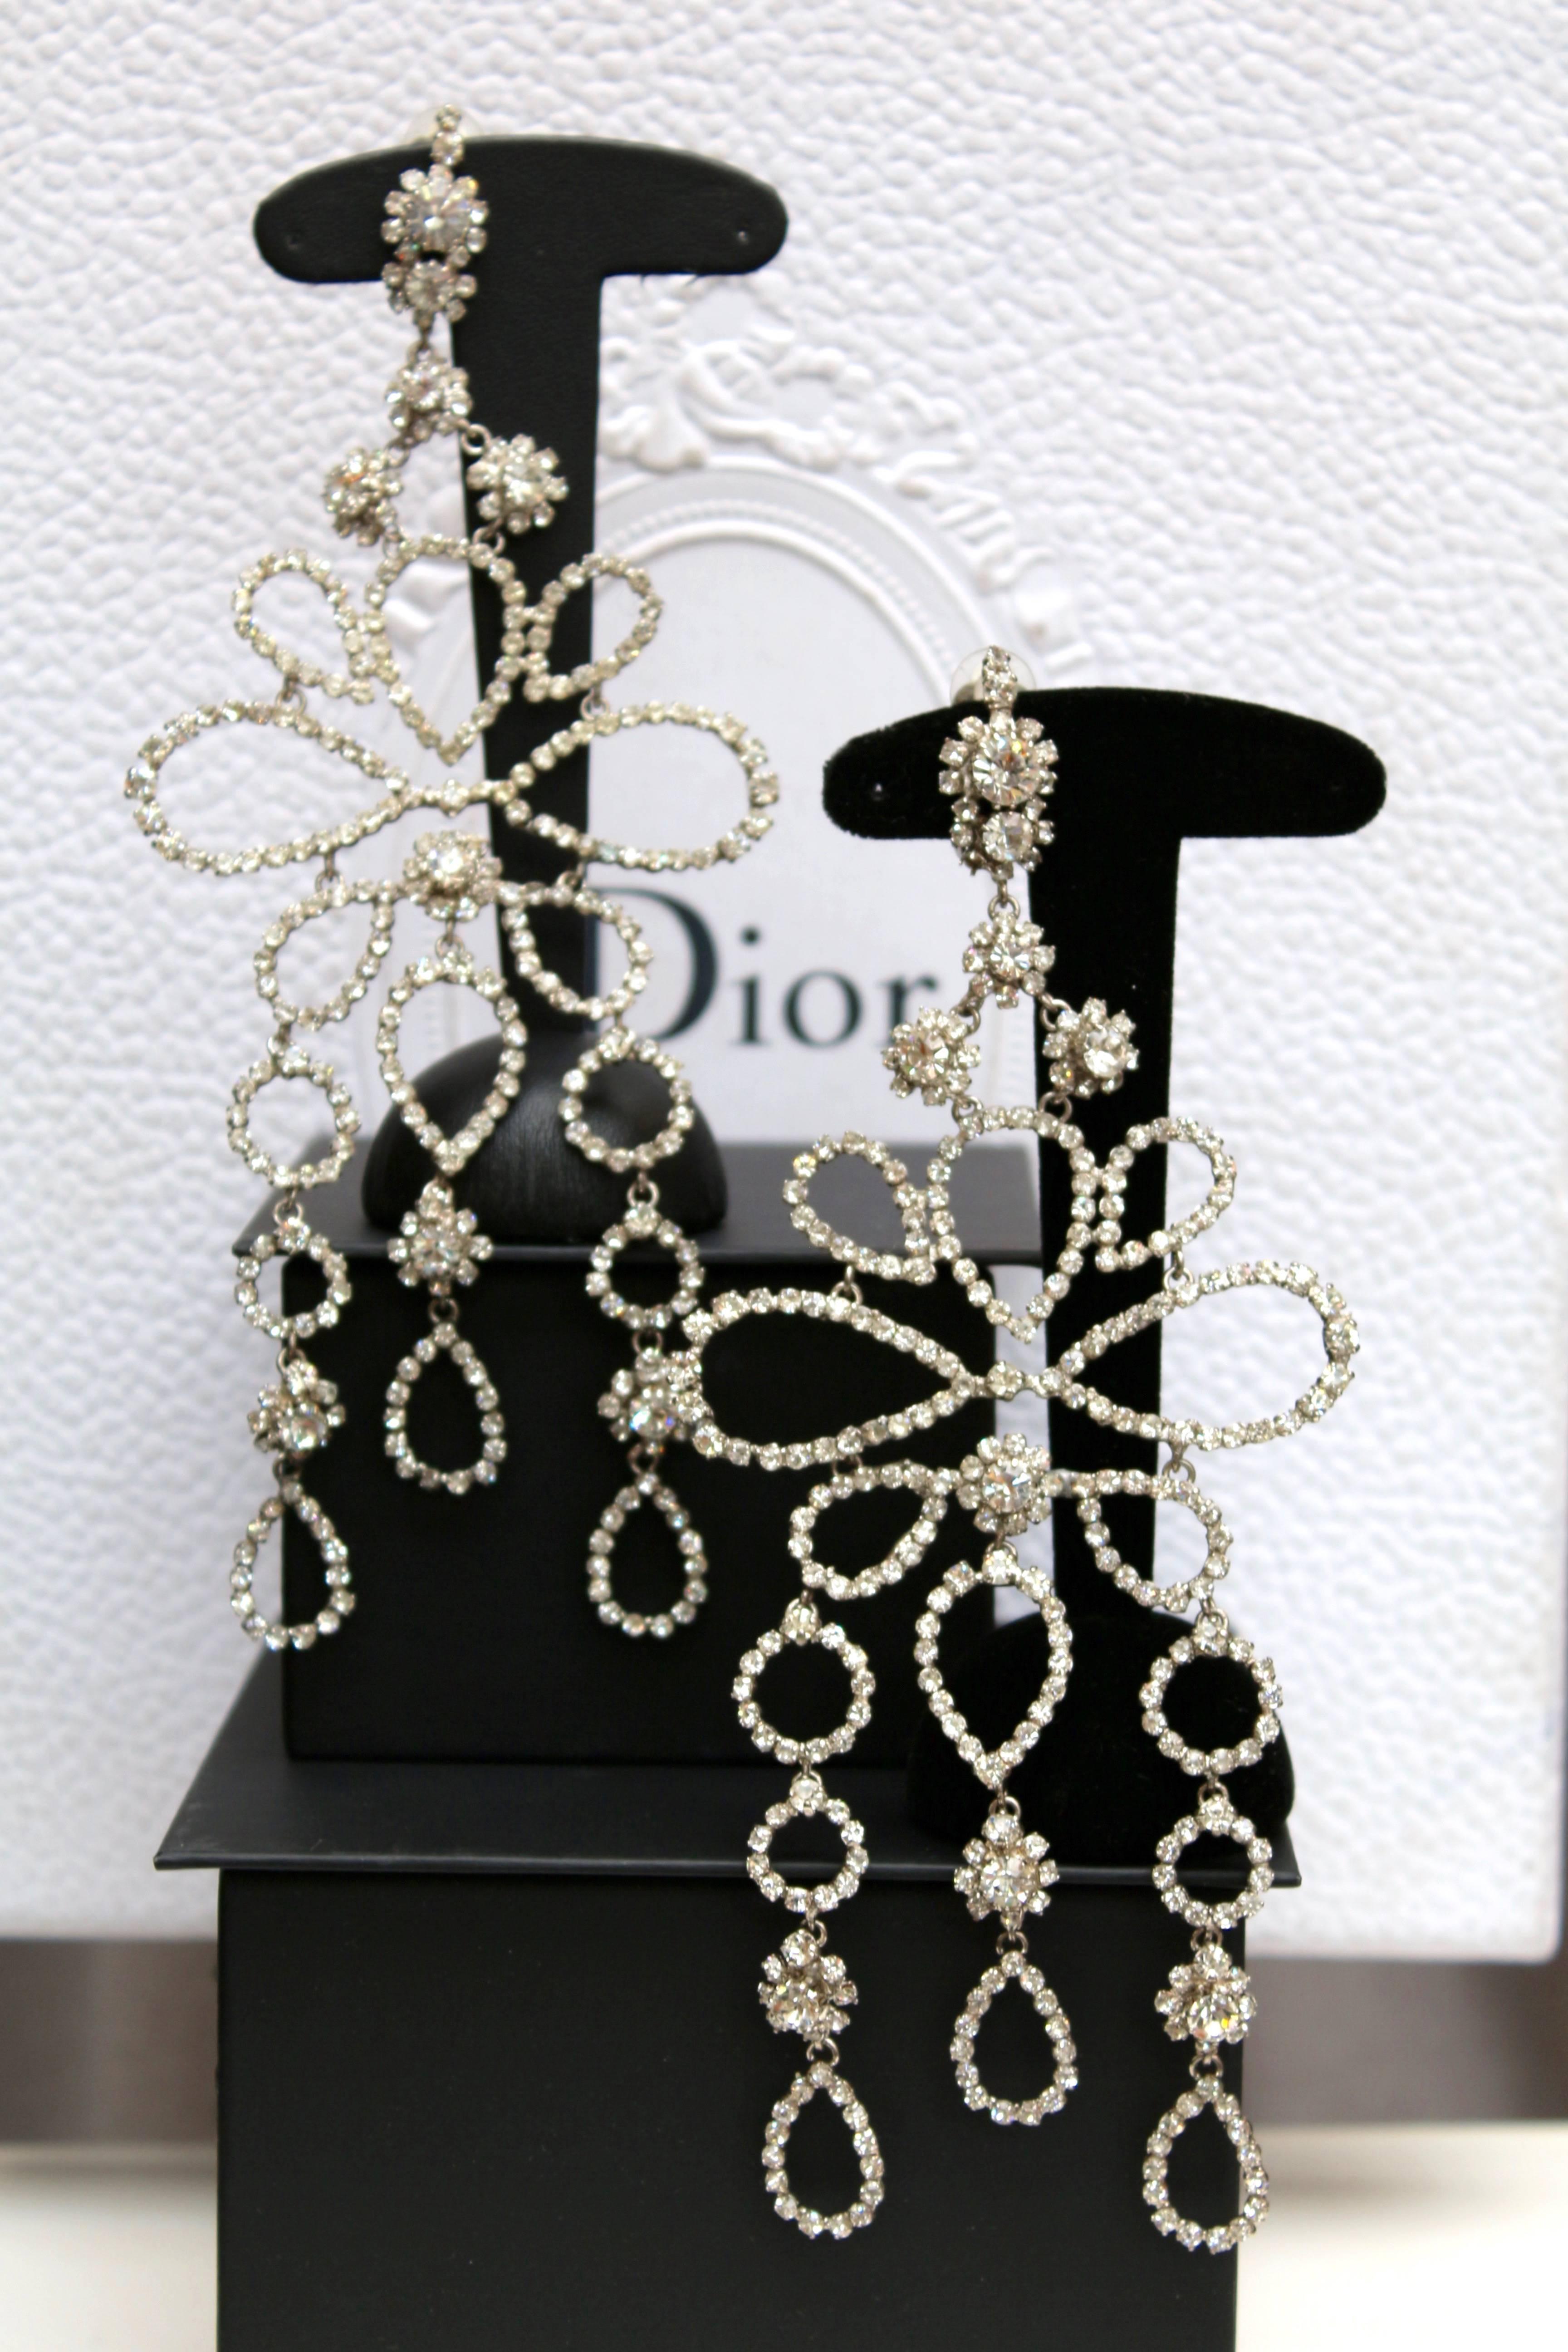 CHRISTIAN DIOR RUNWAY (Made in France) Magnificent spectacular pair of drop clip-on earrings composed of a gilded metal setting entirely paved with rhinestones in different size, in the shape of tear-drops or circles. A flower pattern decorates the